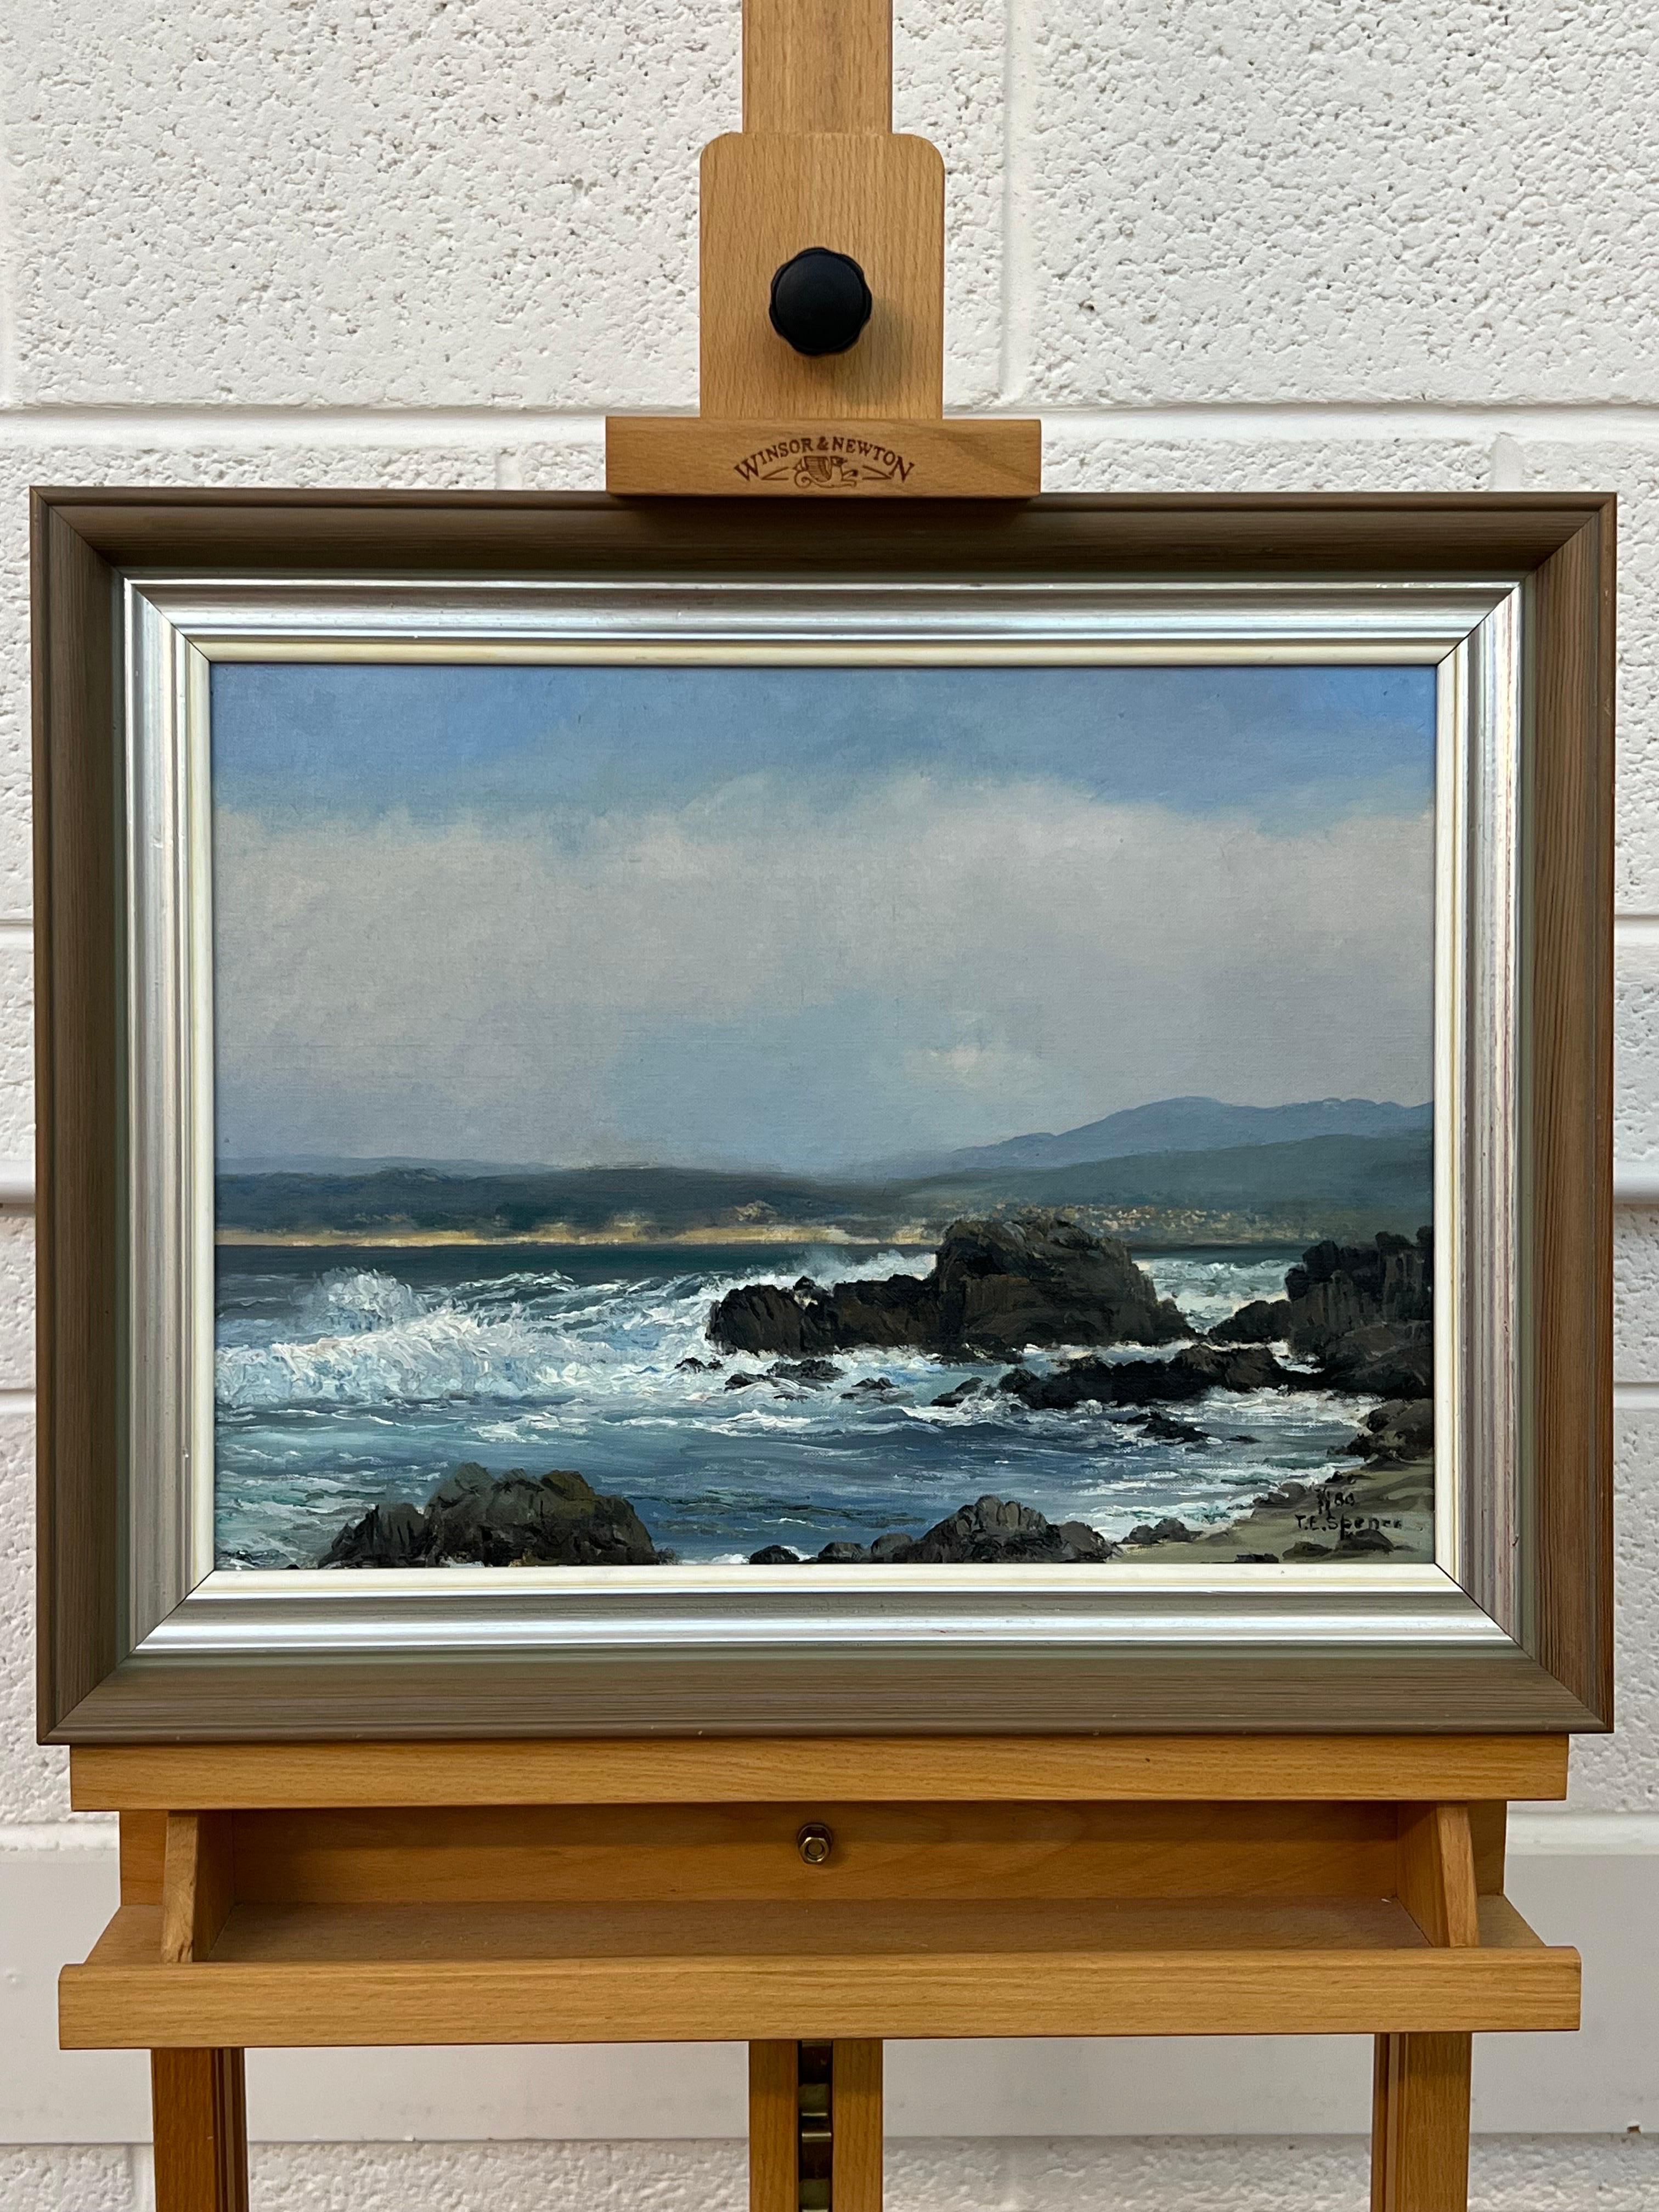 Seascape Painting of Waves Crashing against the Rocks at Pacific Grove, Monterey in California by 20th Century Post War Irish Artist, Tobias Everet Spence

Art measures 16 x 12 inches 
Frame measures inches 19 x 15 inches 

1980's Vintage Original